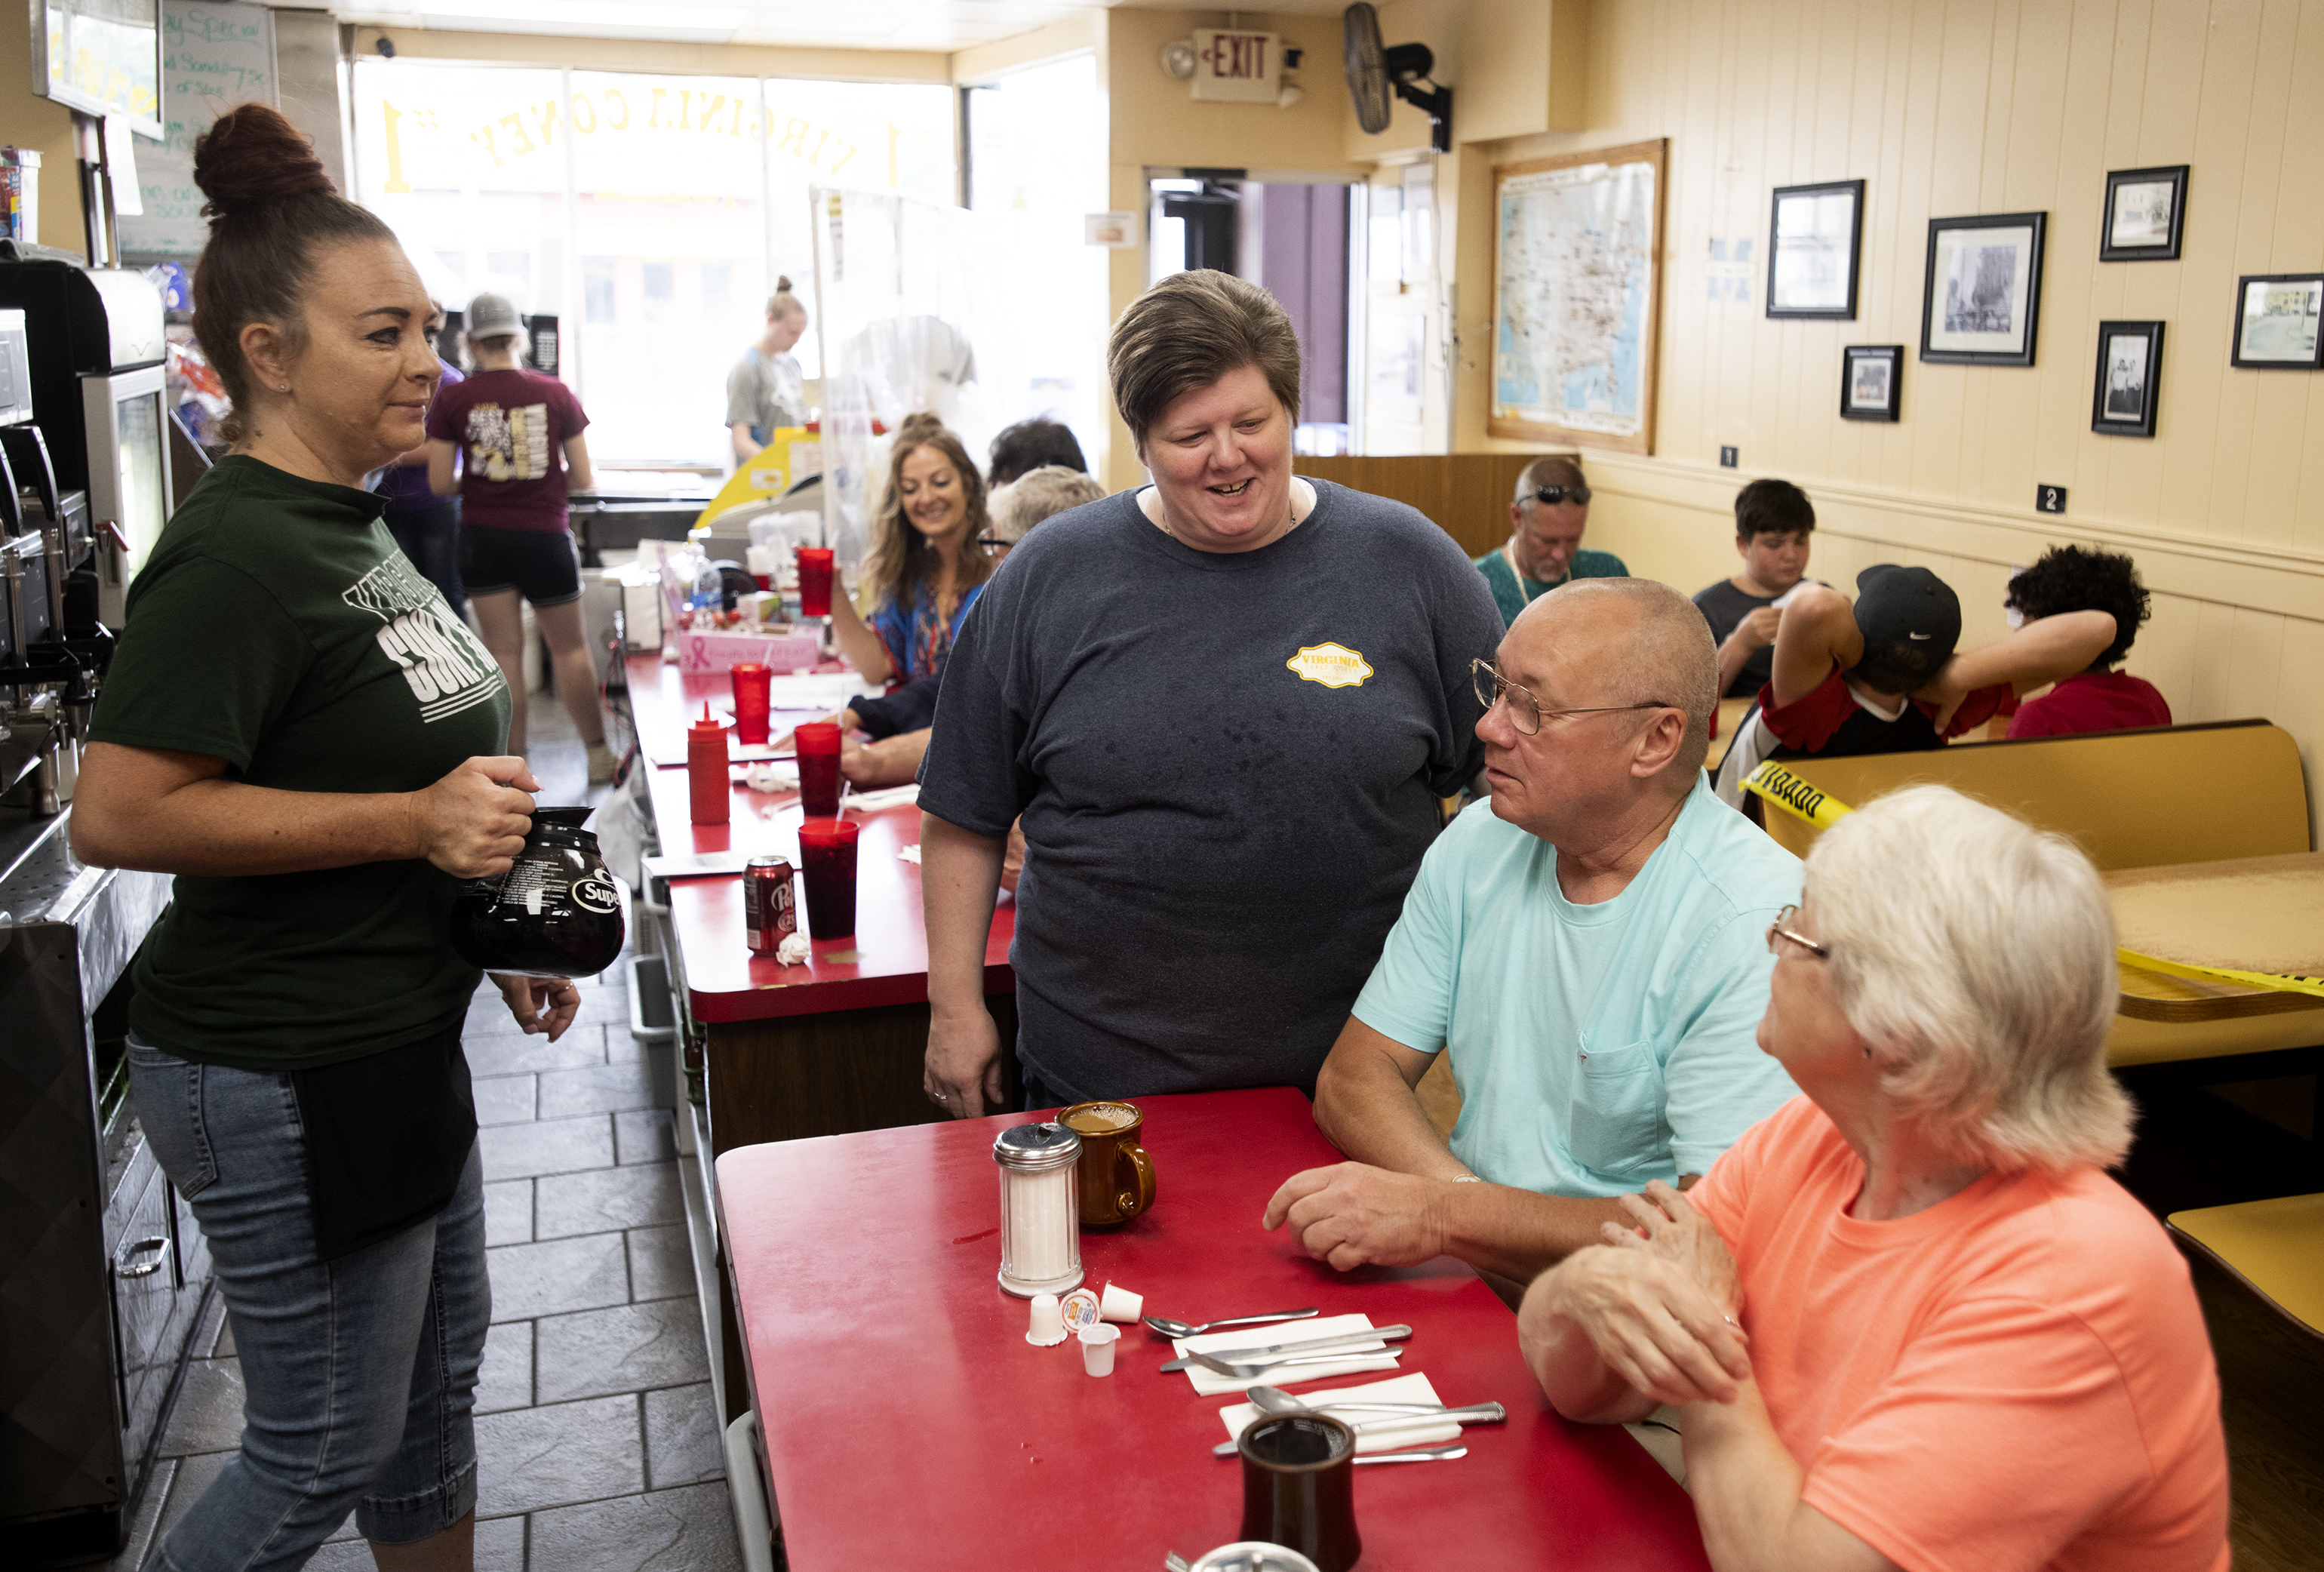 Co-owner Erin Matthews, middle, talks with customers at Virginia Coney Island on Monday, July 6, 2020. The restaurant has been serving the Jackson community since 1914.